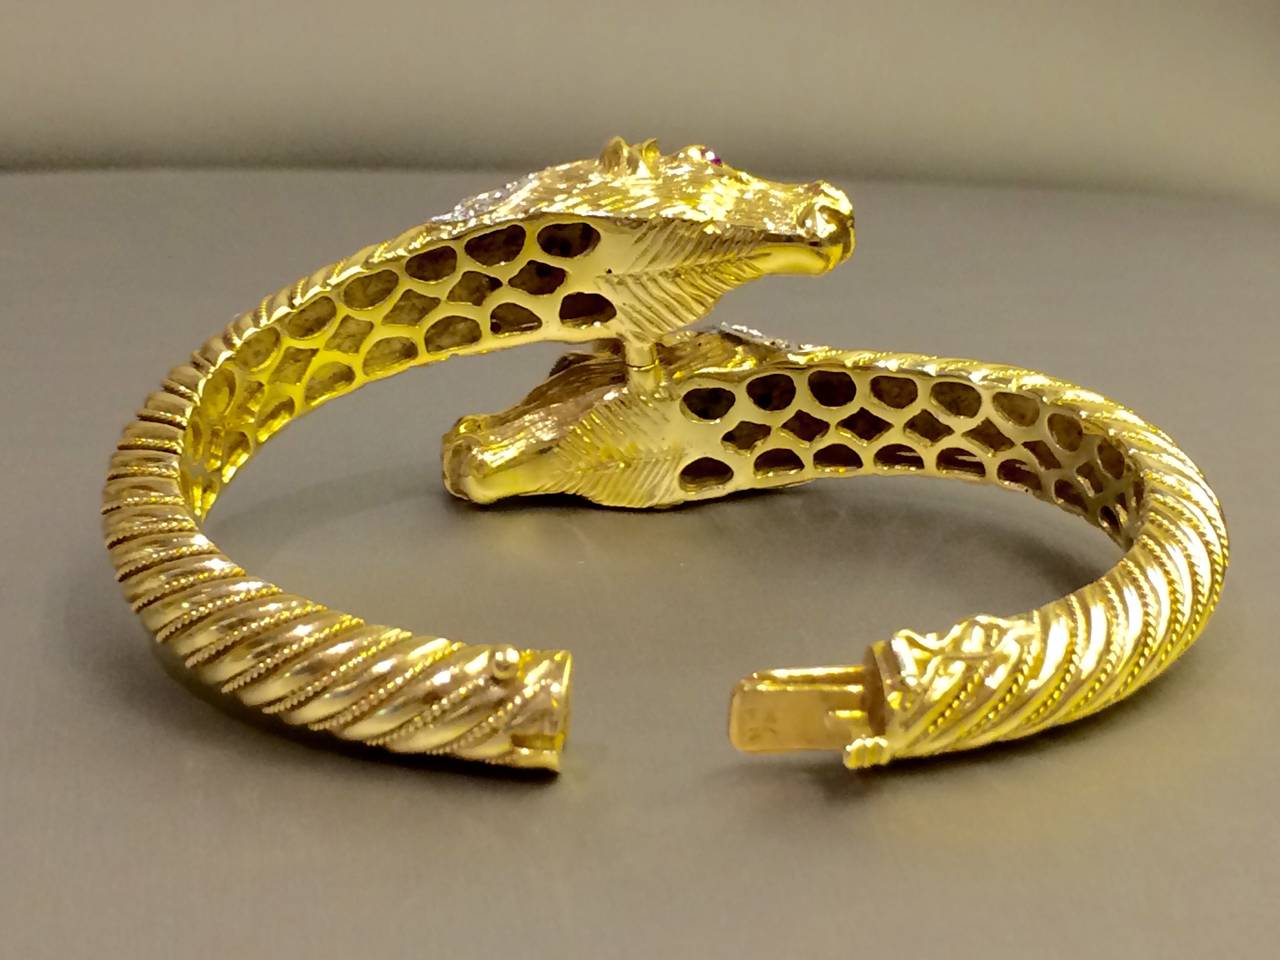 Horse Head Diamond Gold Crossover Bangle Bracelet In Excellent Condition For Sale In Ottawa, Ontario